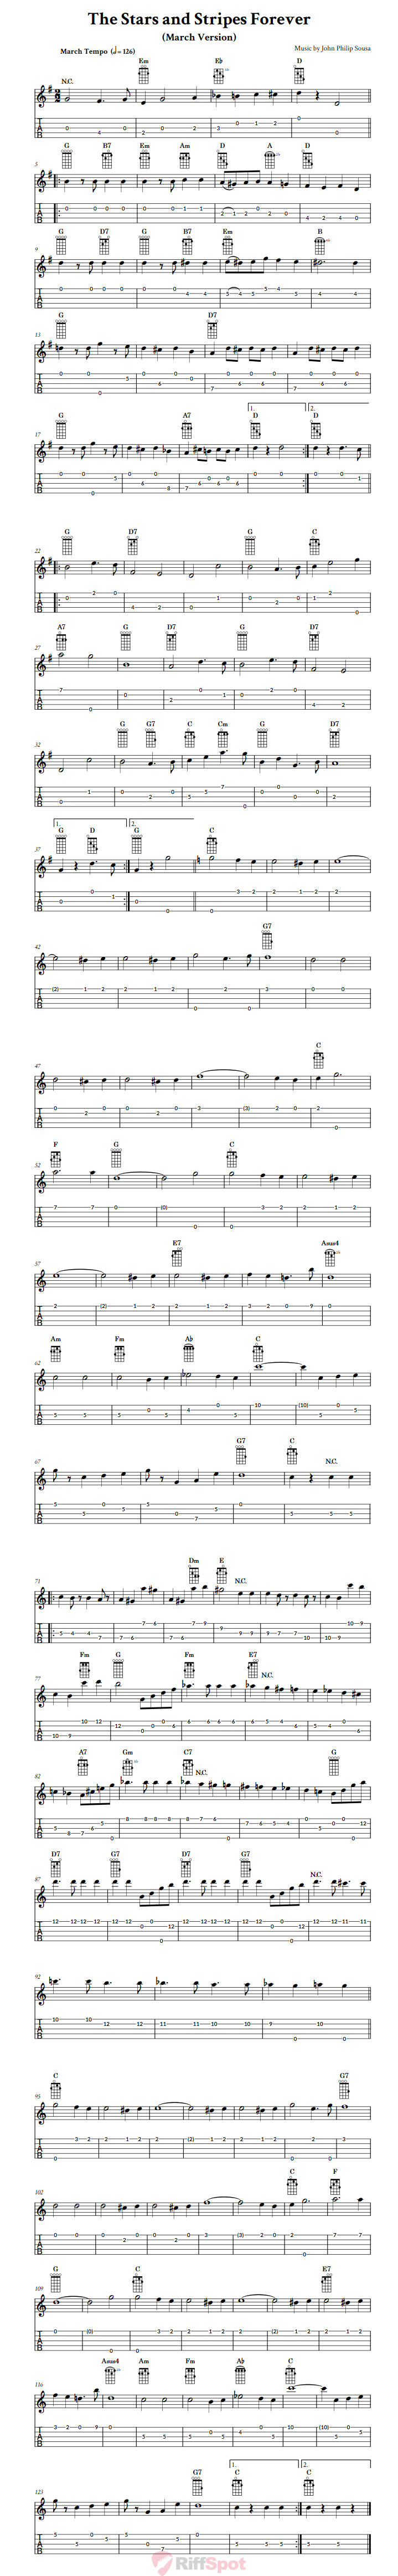 The Stars and Stripes Forever (March)  Banjo Tab